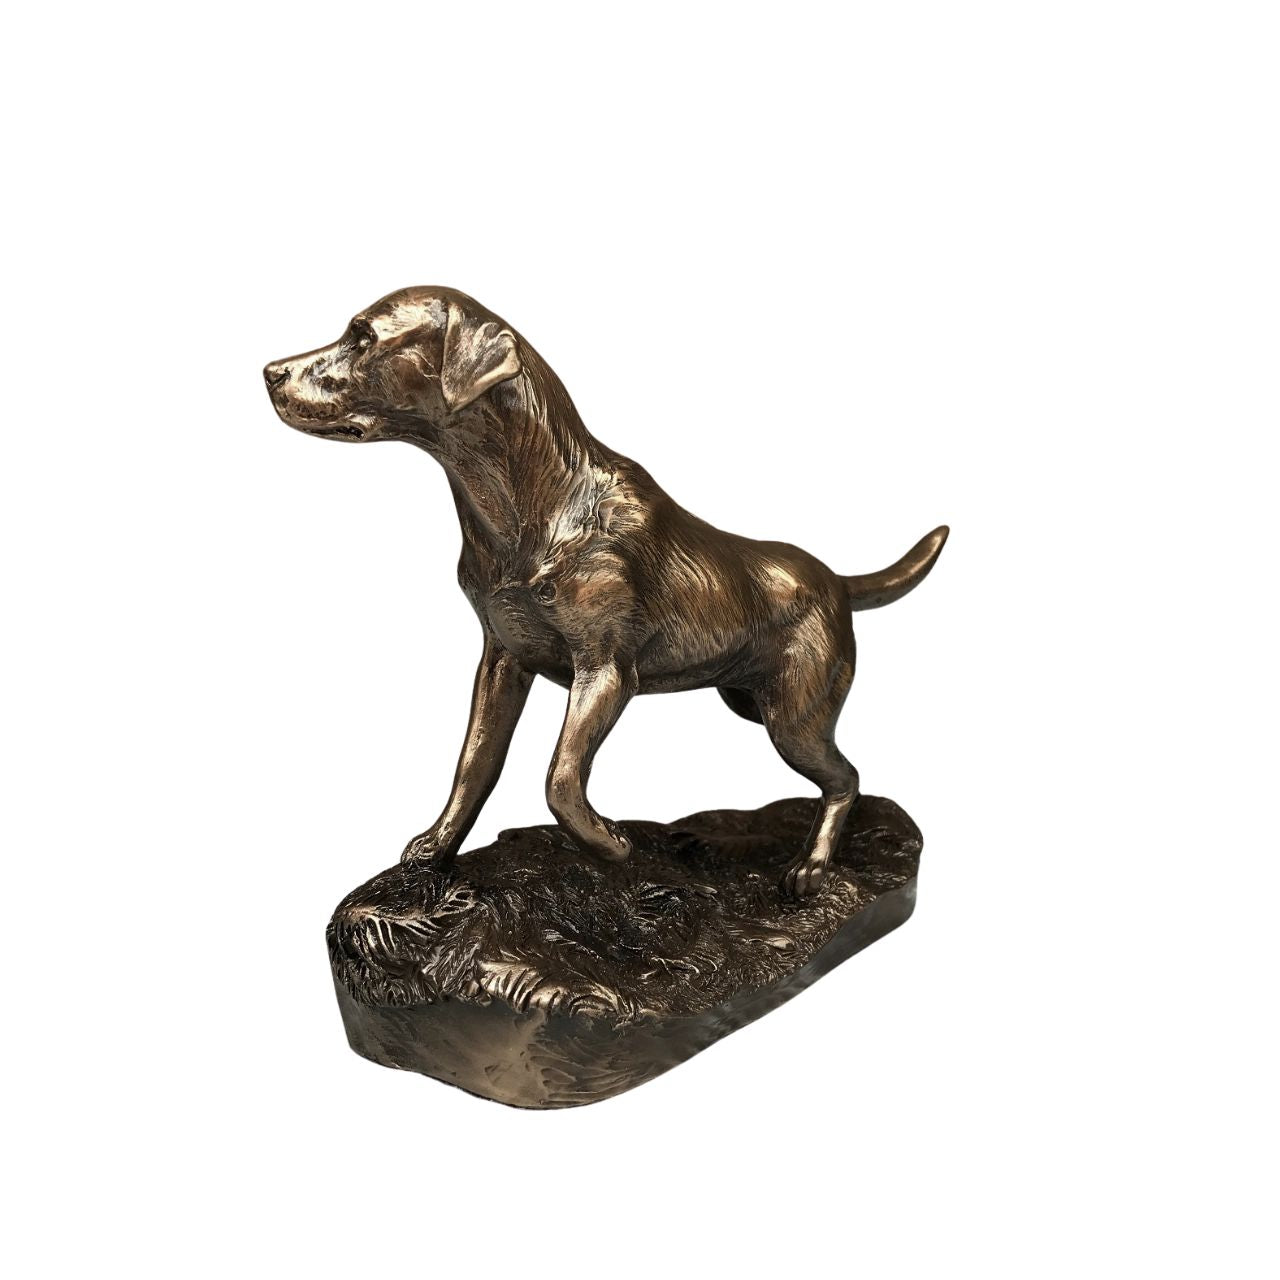 Genesis Fine Arts has evolved into a much loved and world famous Irish brand to produce a striking range of handcrafted cold cast bronze sculptures.